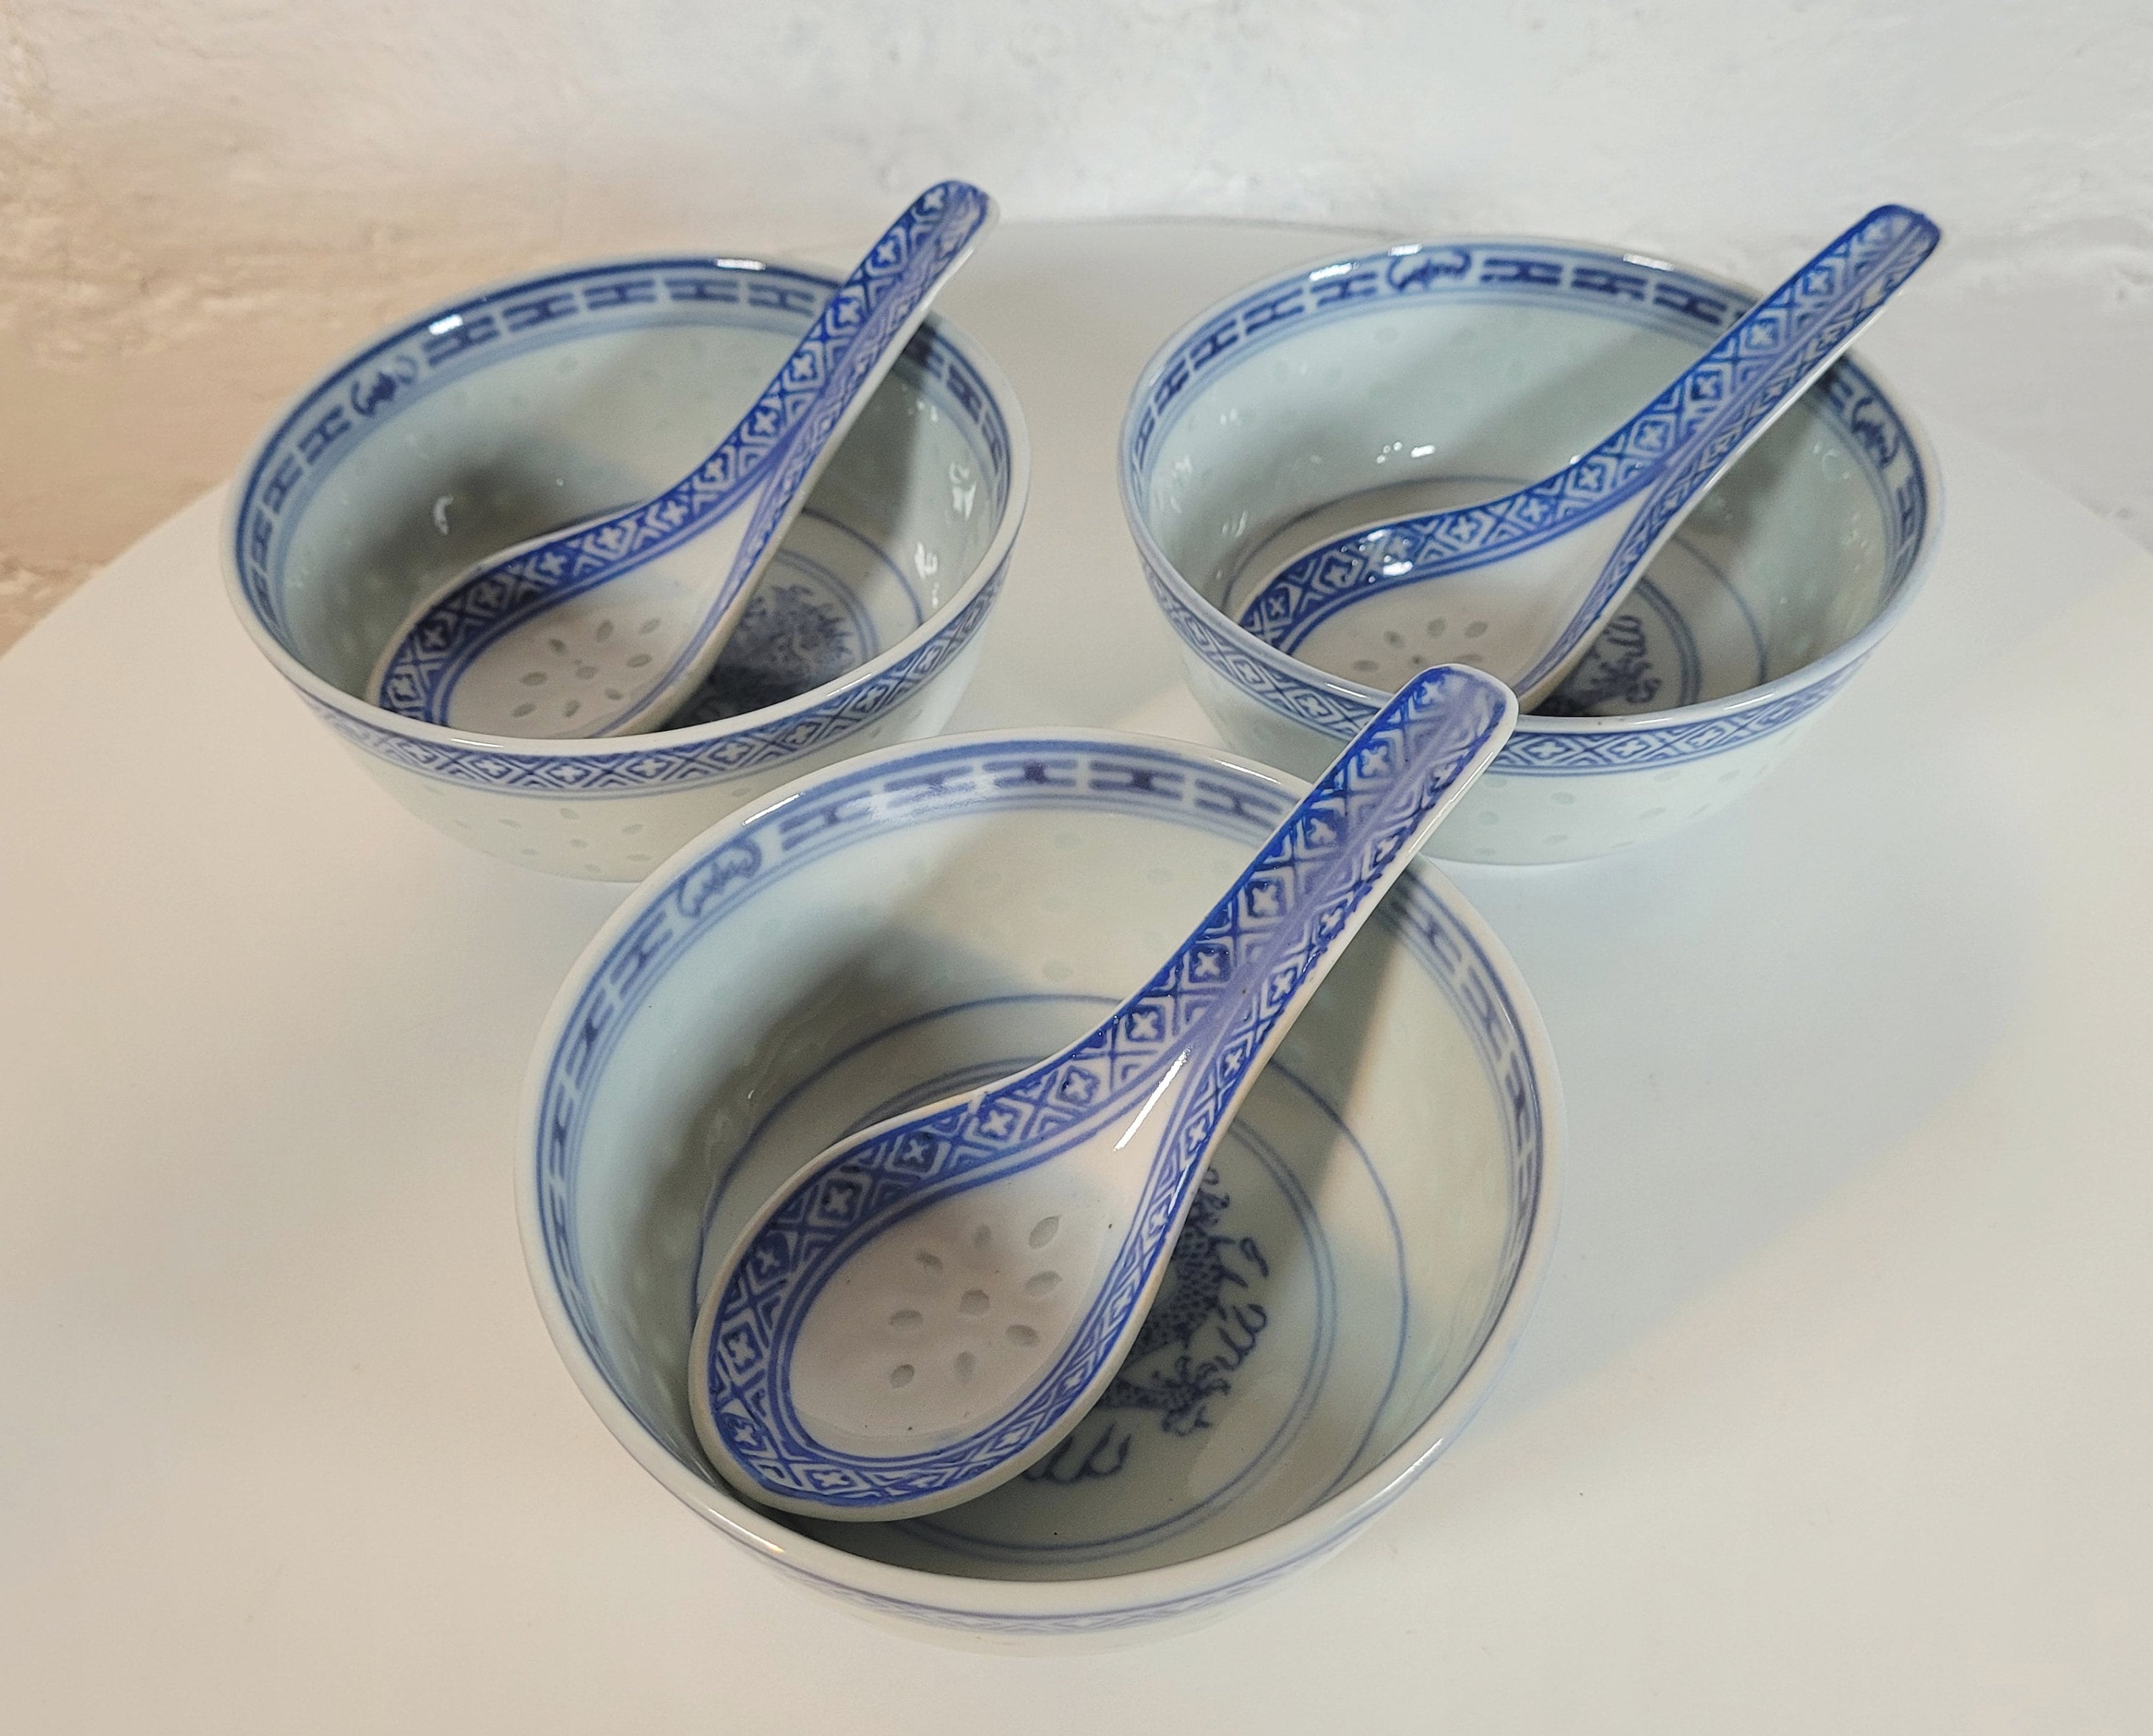 Three Vintage Chinese Soup Bowls With Spoons / Blue and White Rice Grain  China / Blue and White Pottery / Traditional Chinese Pottery 